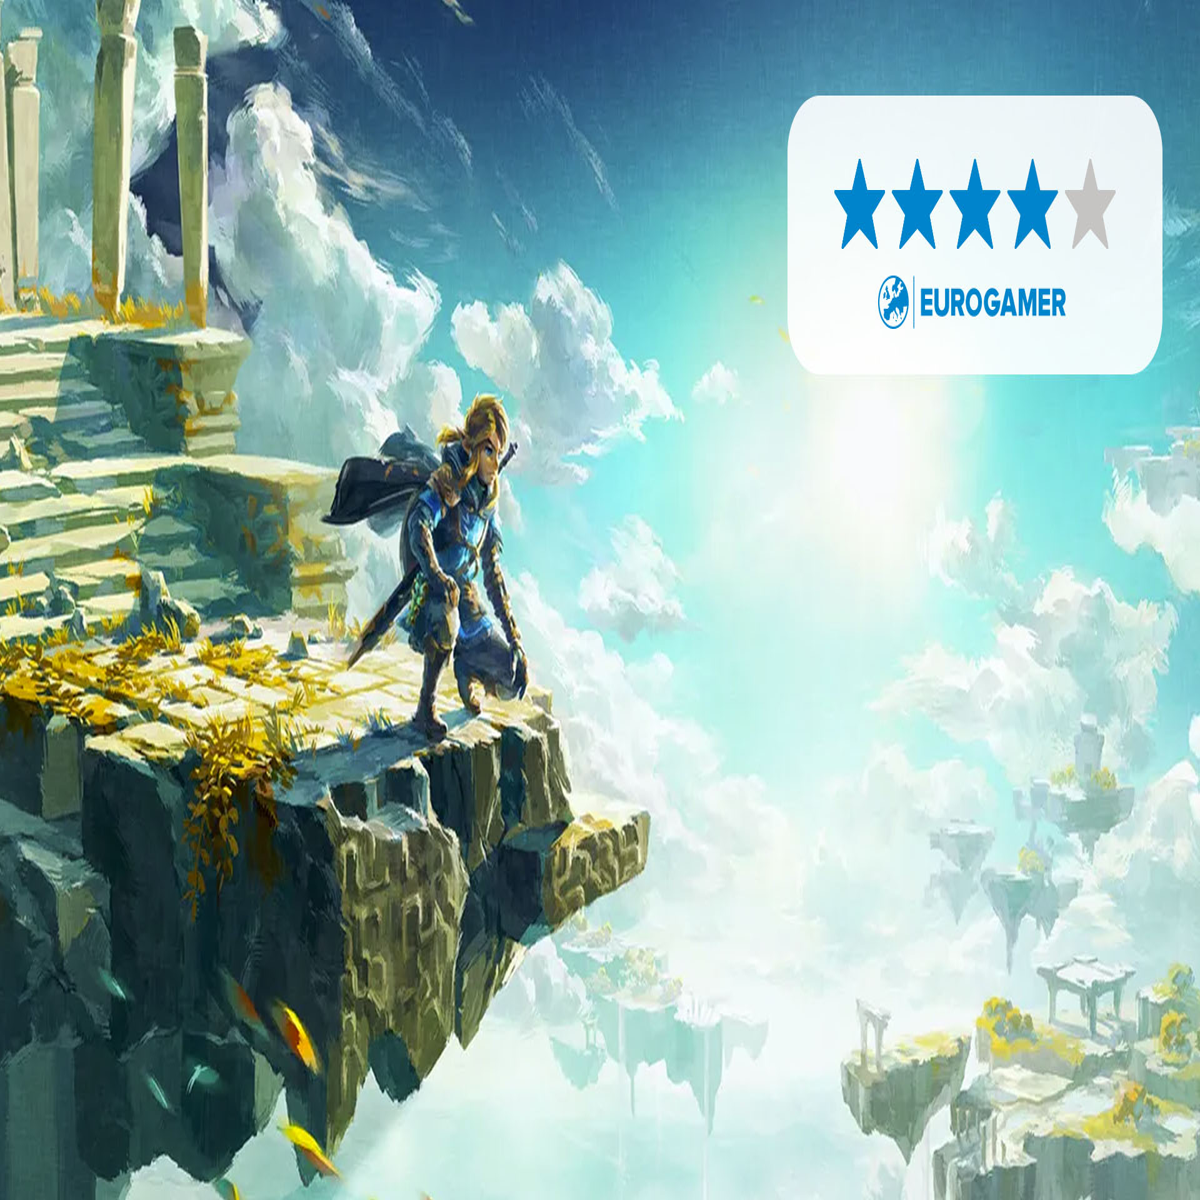 Zelda: Tears of the Kingdom's user reviews go from one extreme to